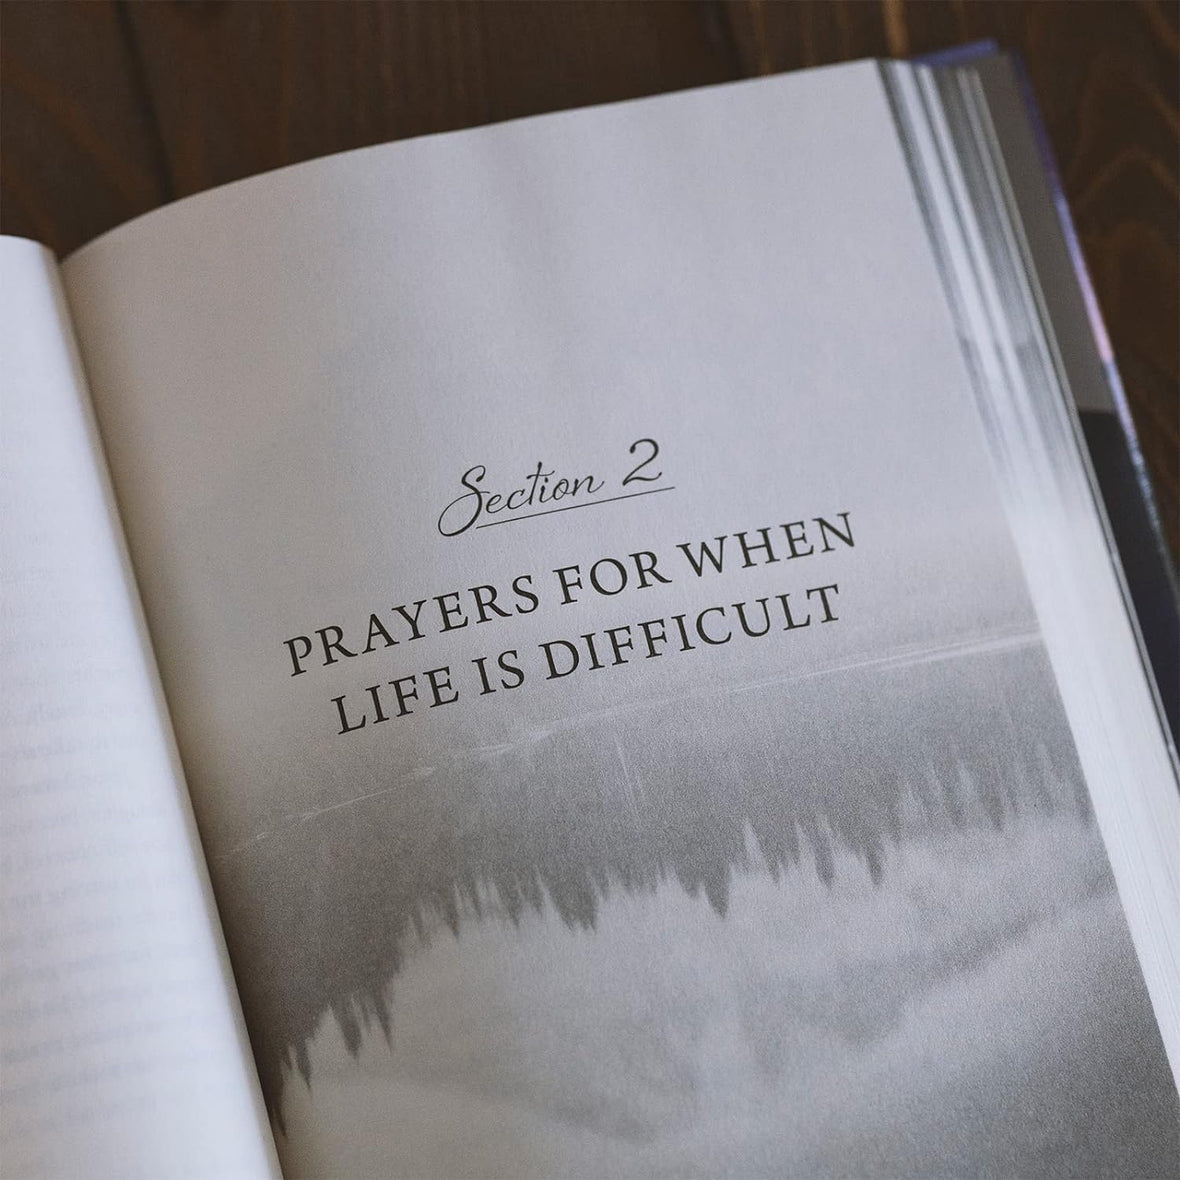 When You Don't Know What to Pray: 100 Essential Prayers for Enduring Life's Storms